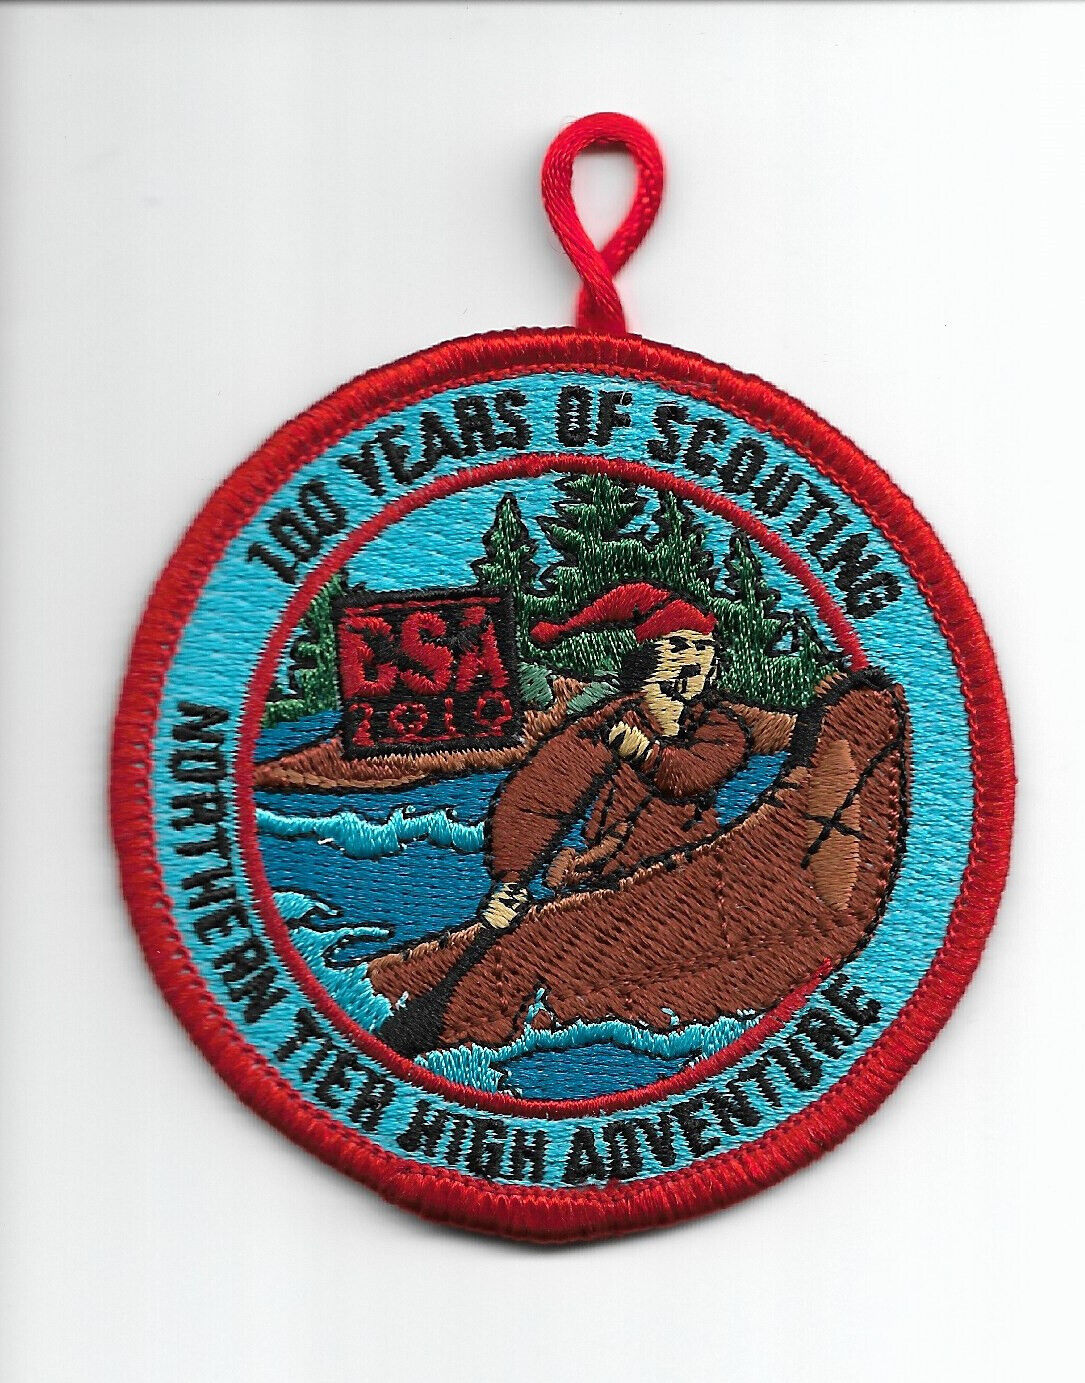 NORTHERN TIER HIGH ADVENTURE BASE * 100 YEARS OF SCOUTING - 2010 * 3 INCH